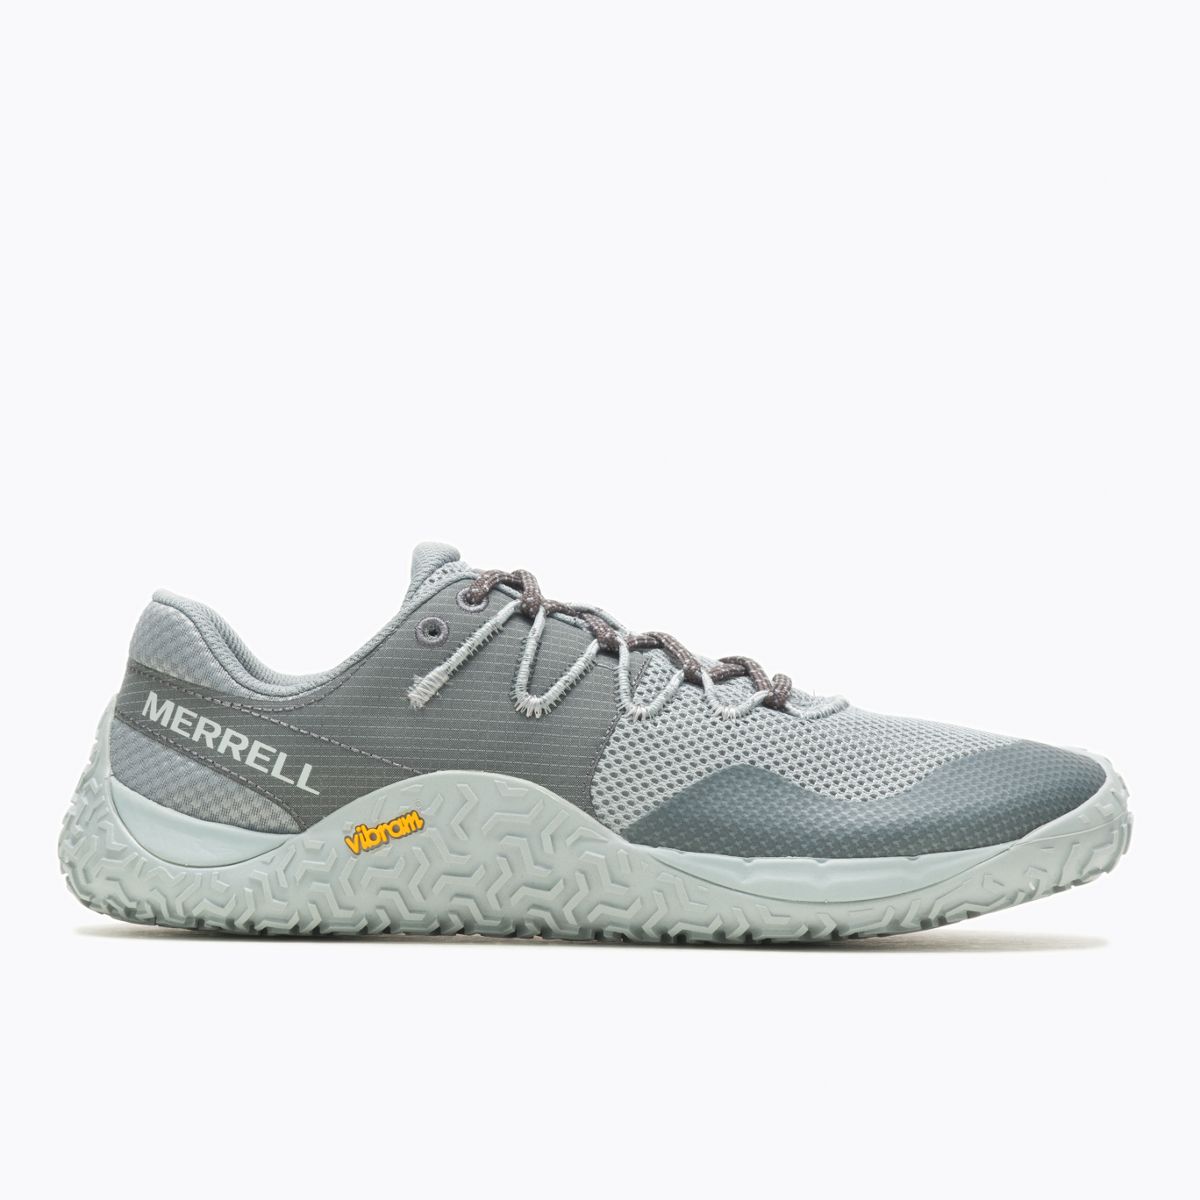 Merrell Trail Glove 7  Minimalist shoe for everything